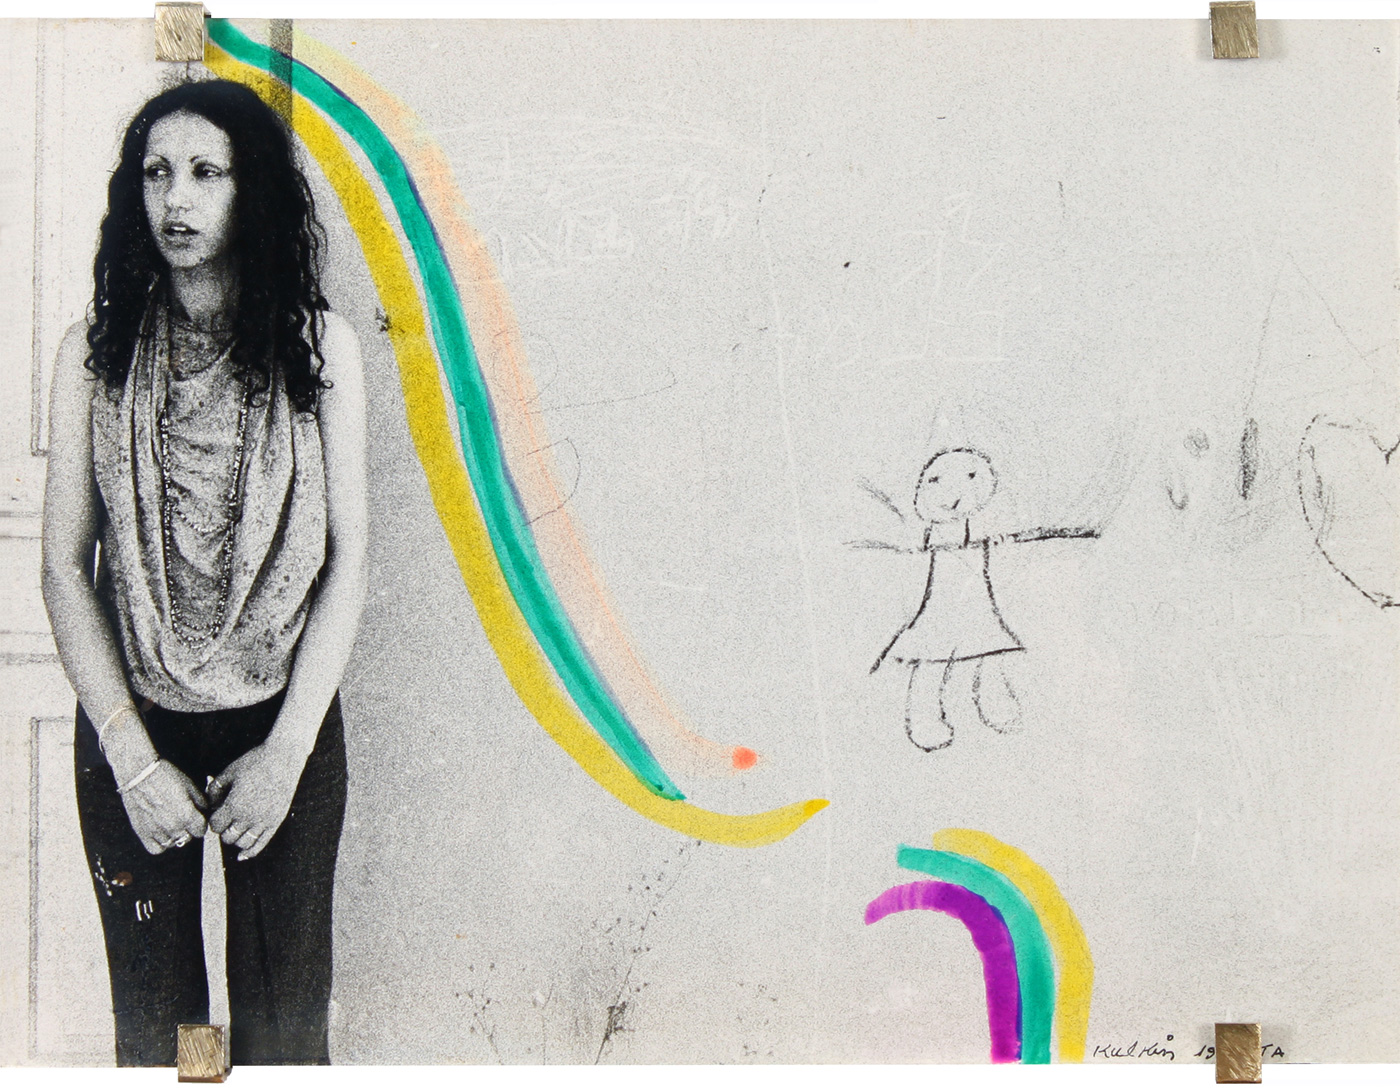 Norman Kulkin Painted Photograph - A Woman in front of a Graffiti Wall - נורמן קולקין - צילום - ציור - Back To List of Israeli Paintings